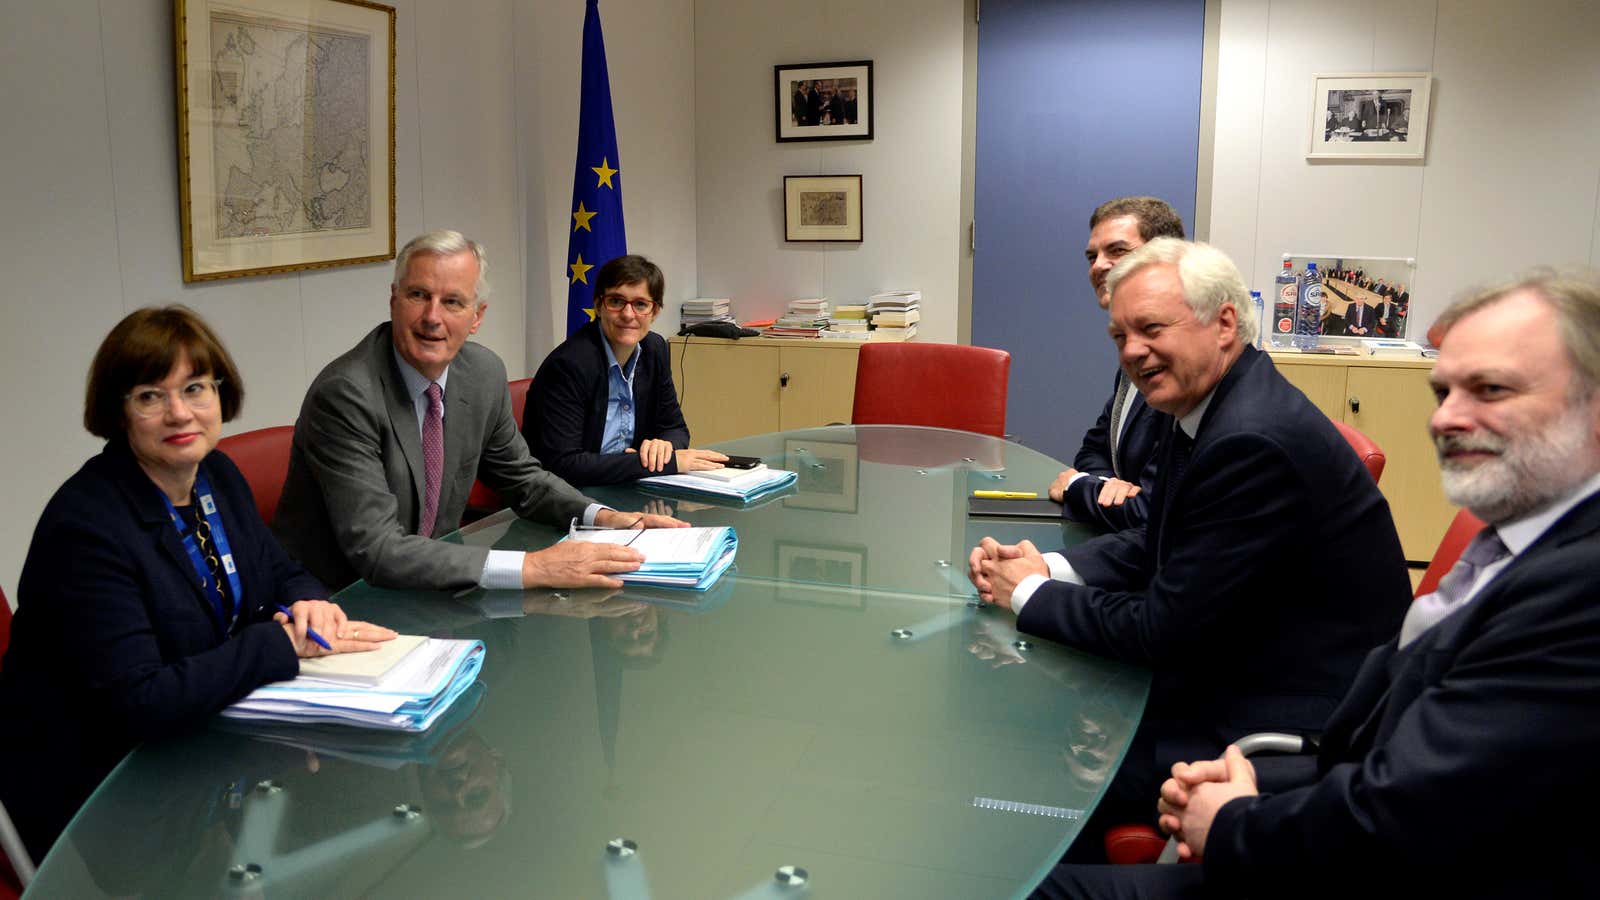 European Union’s chief Brexit negotiator Michel Barnier and his delegation and Britain’s Secretary of State for Exiting the European Union David Davis and his delegation attend a first full round of talks on July 17, 2017.